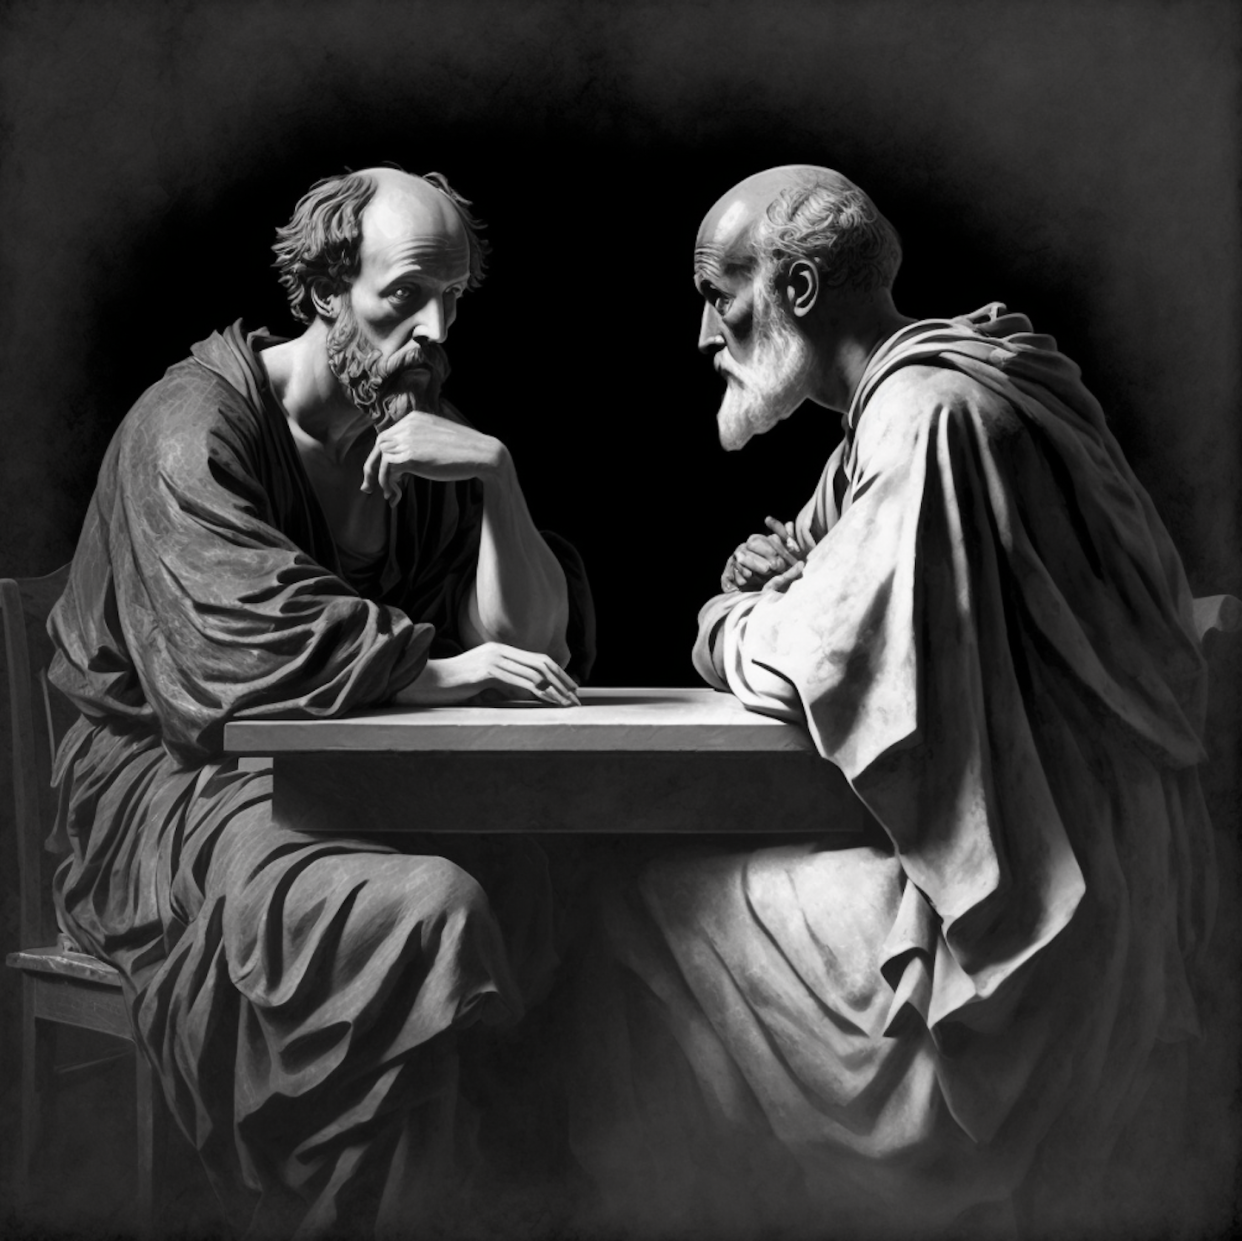 An AI-generated image of two philosophers in dialogue. Today’s AI-driven chatbots follow a rich history of dialogue that goes back to the philosophers of ancient Greece. Author provided